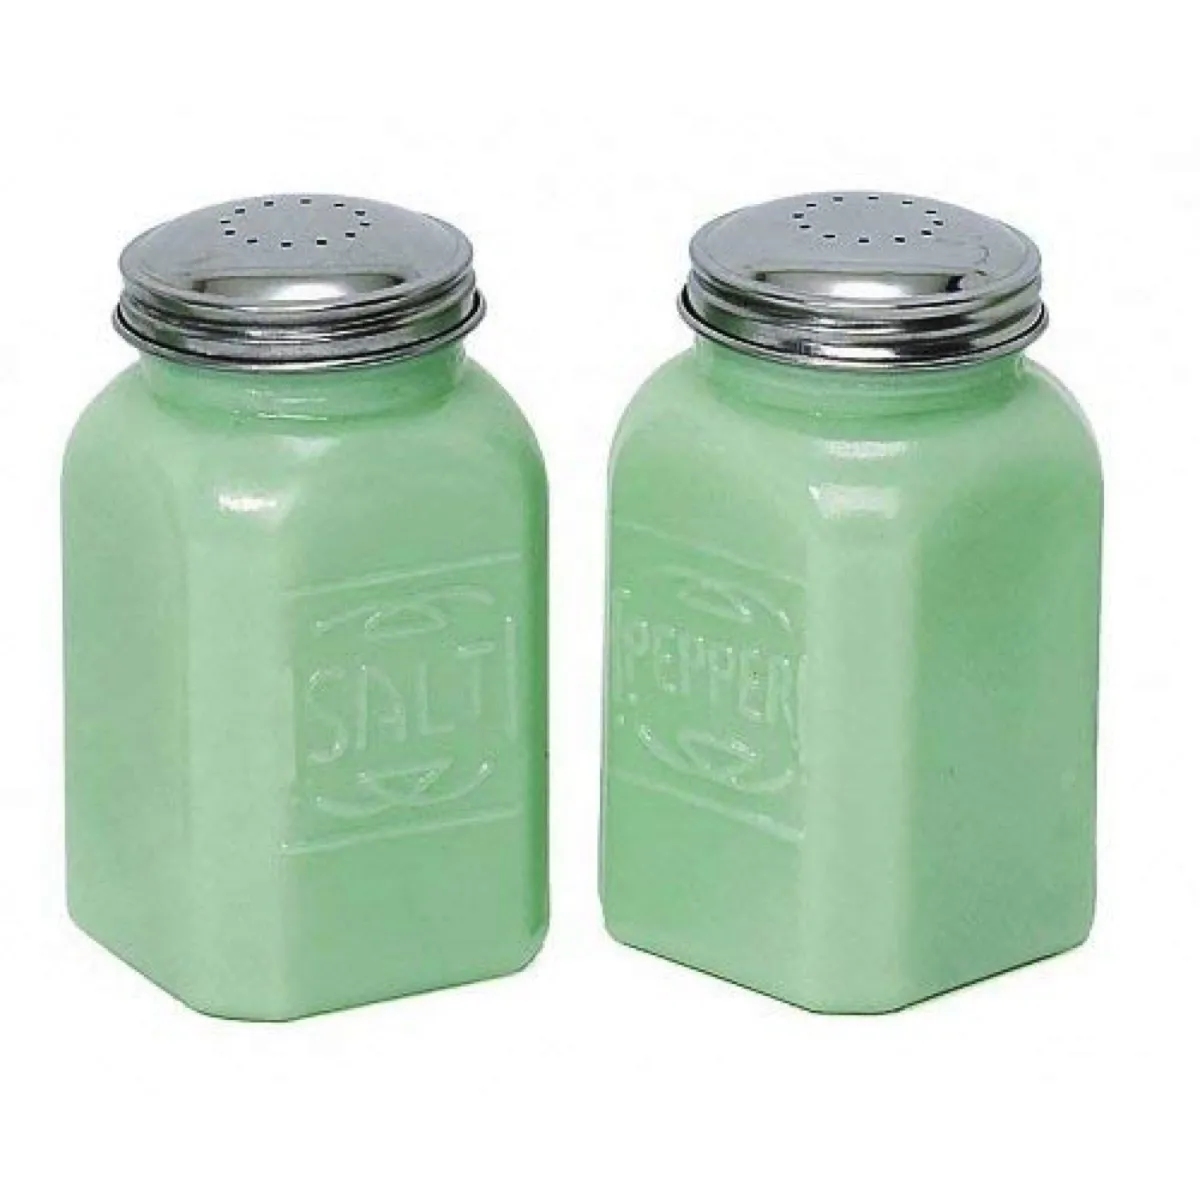 green salt and pepper shakers, old fashioned home items